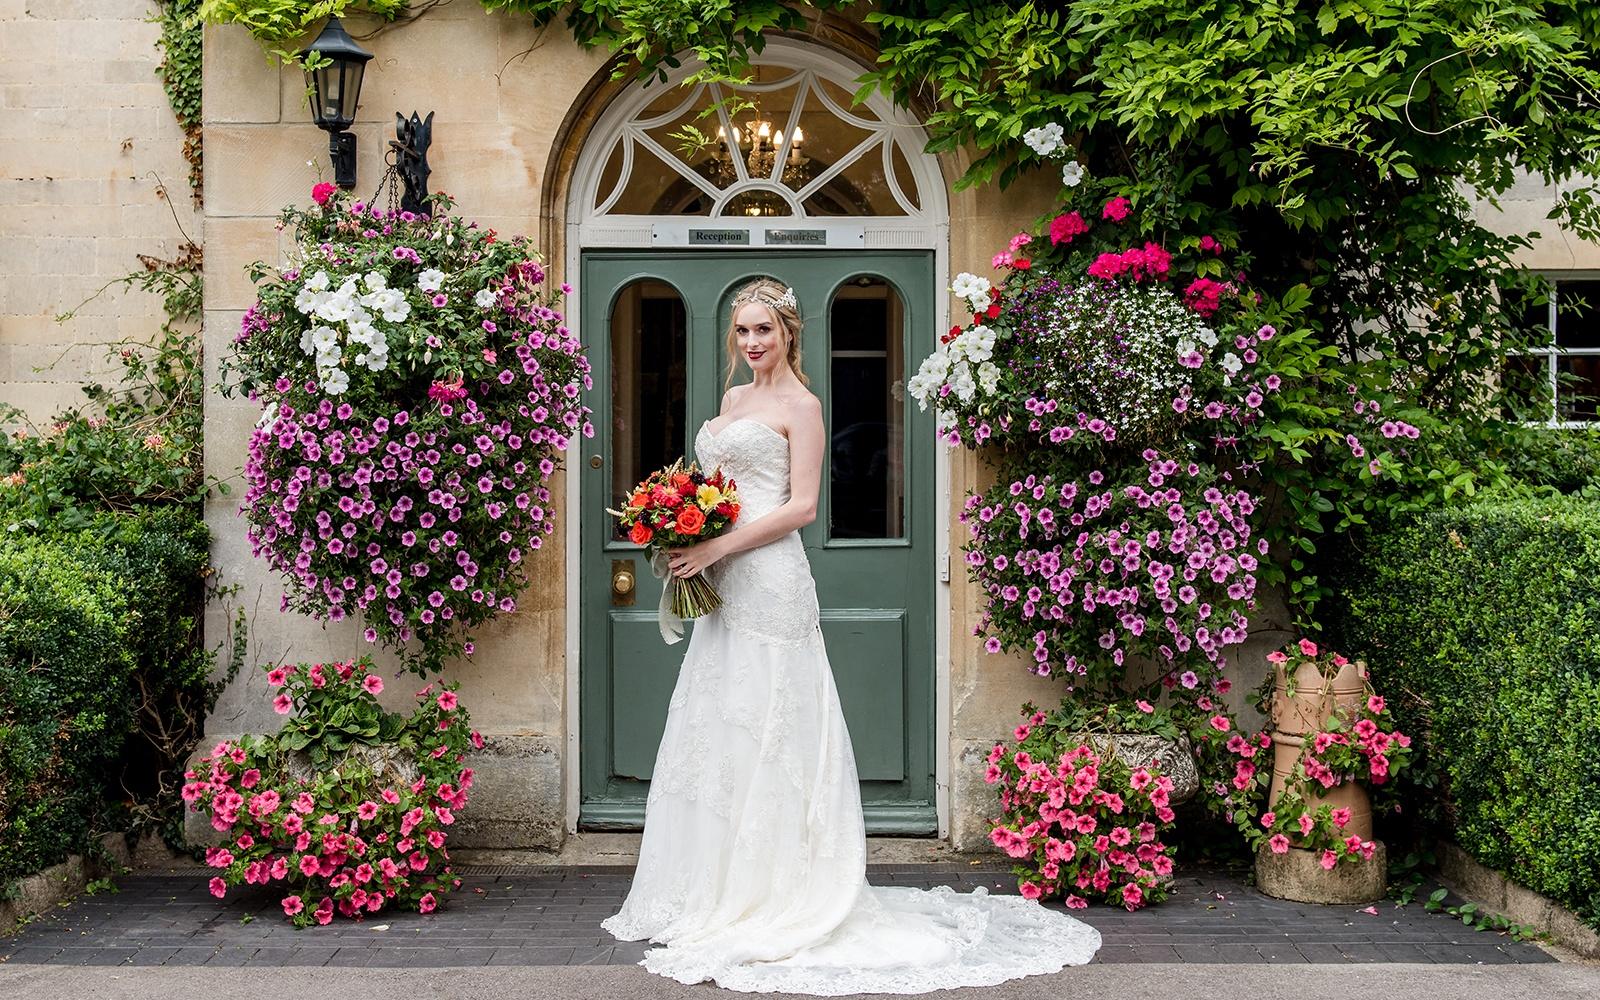 Make Up By Carissa makeup artist Cirencester Gloucestershire cruelty free make-up styled shoot Stratton House Cotswold entrance to wedding venue large floral displays